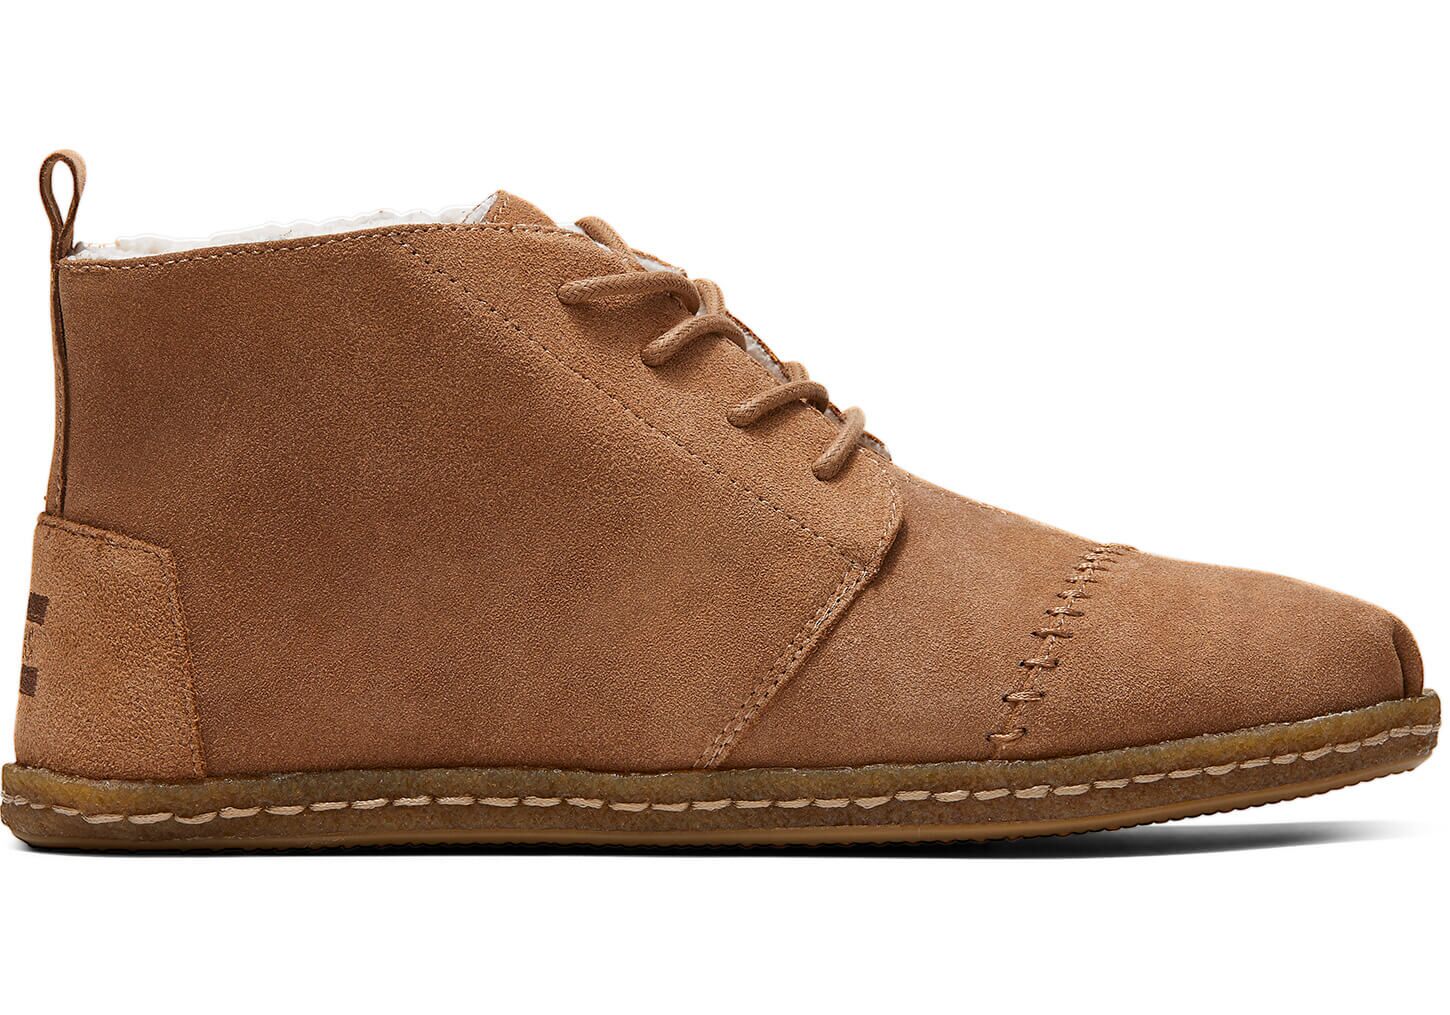 toms shearling boots